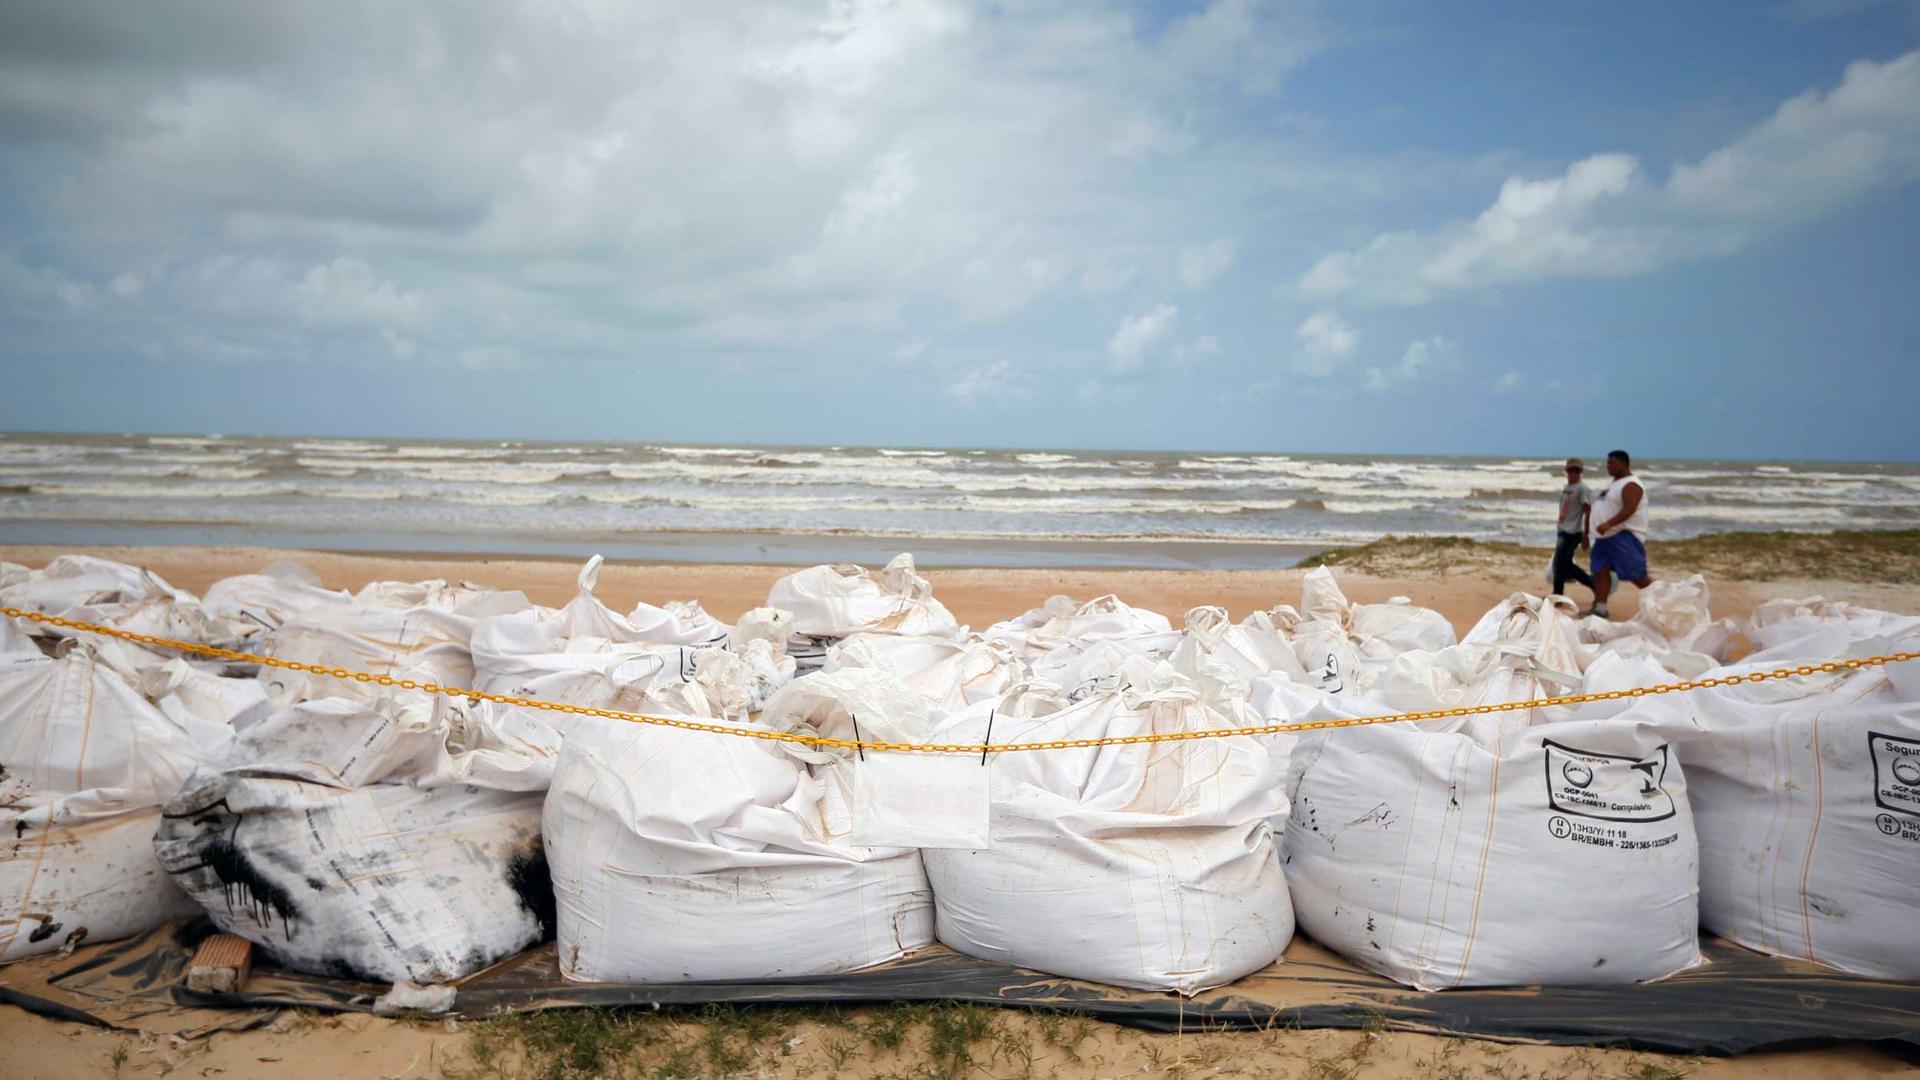 White bags line a beach. The bags are full of oil-covered sand.